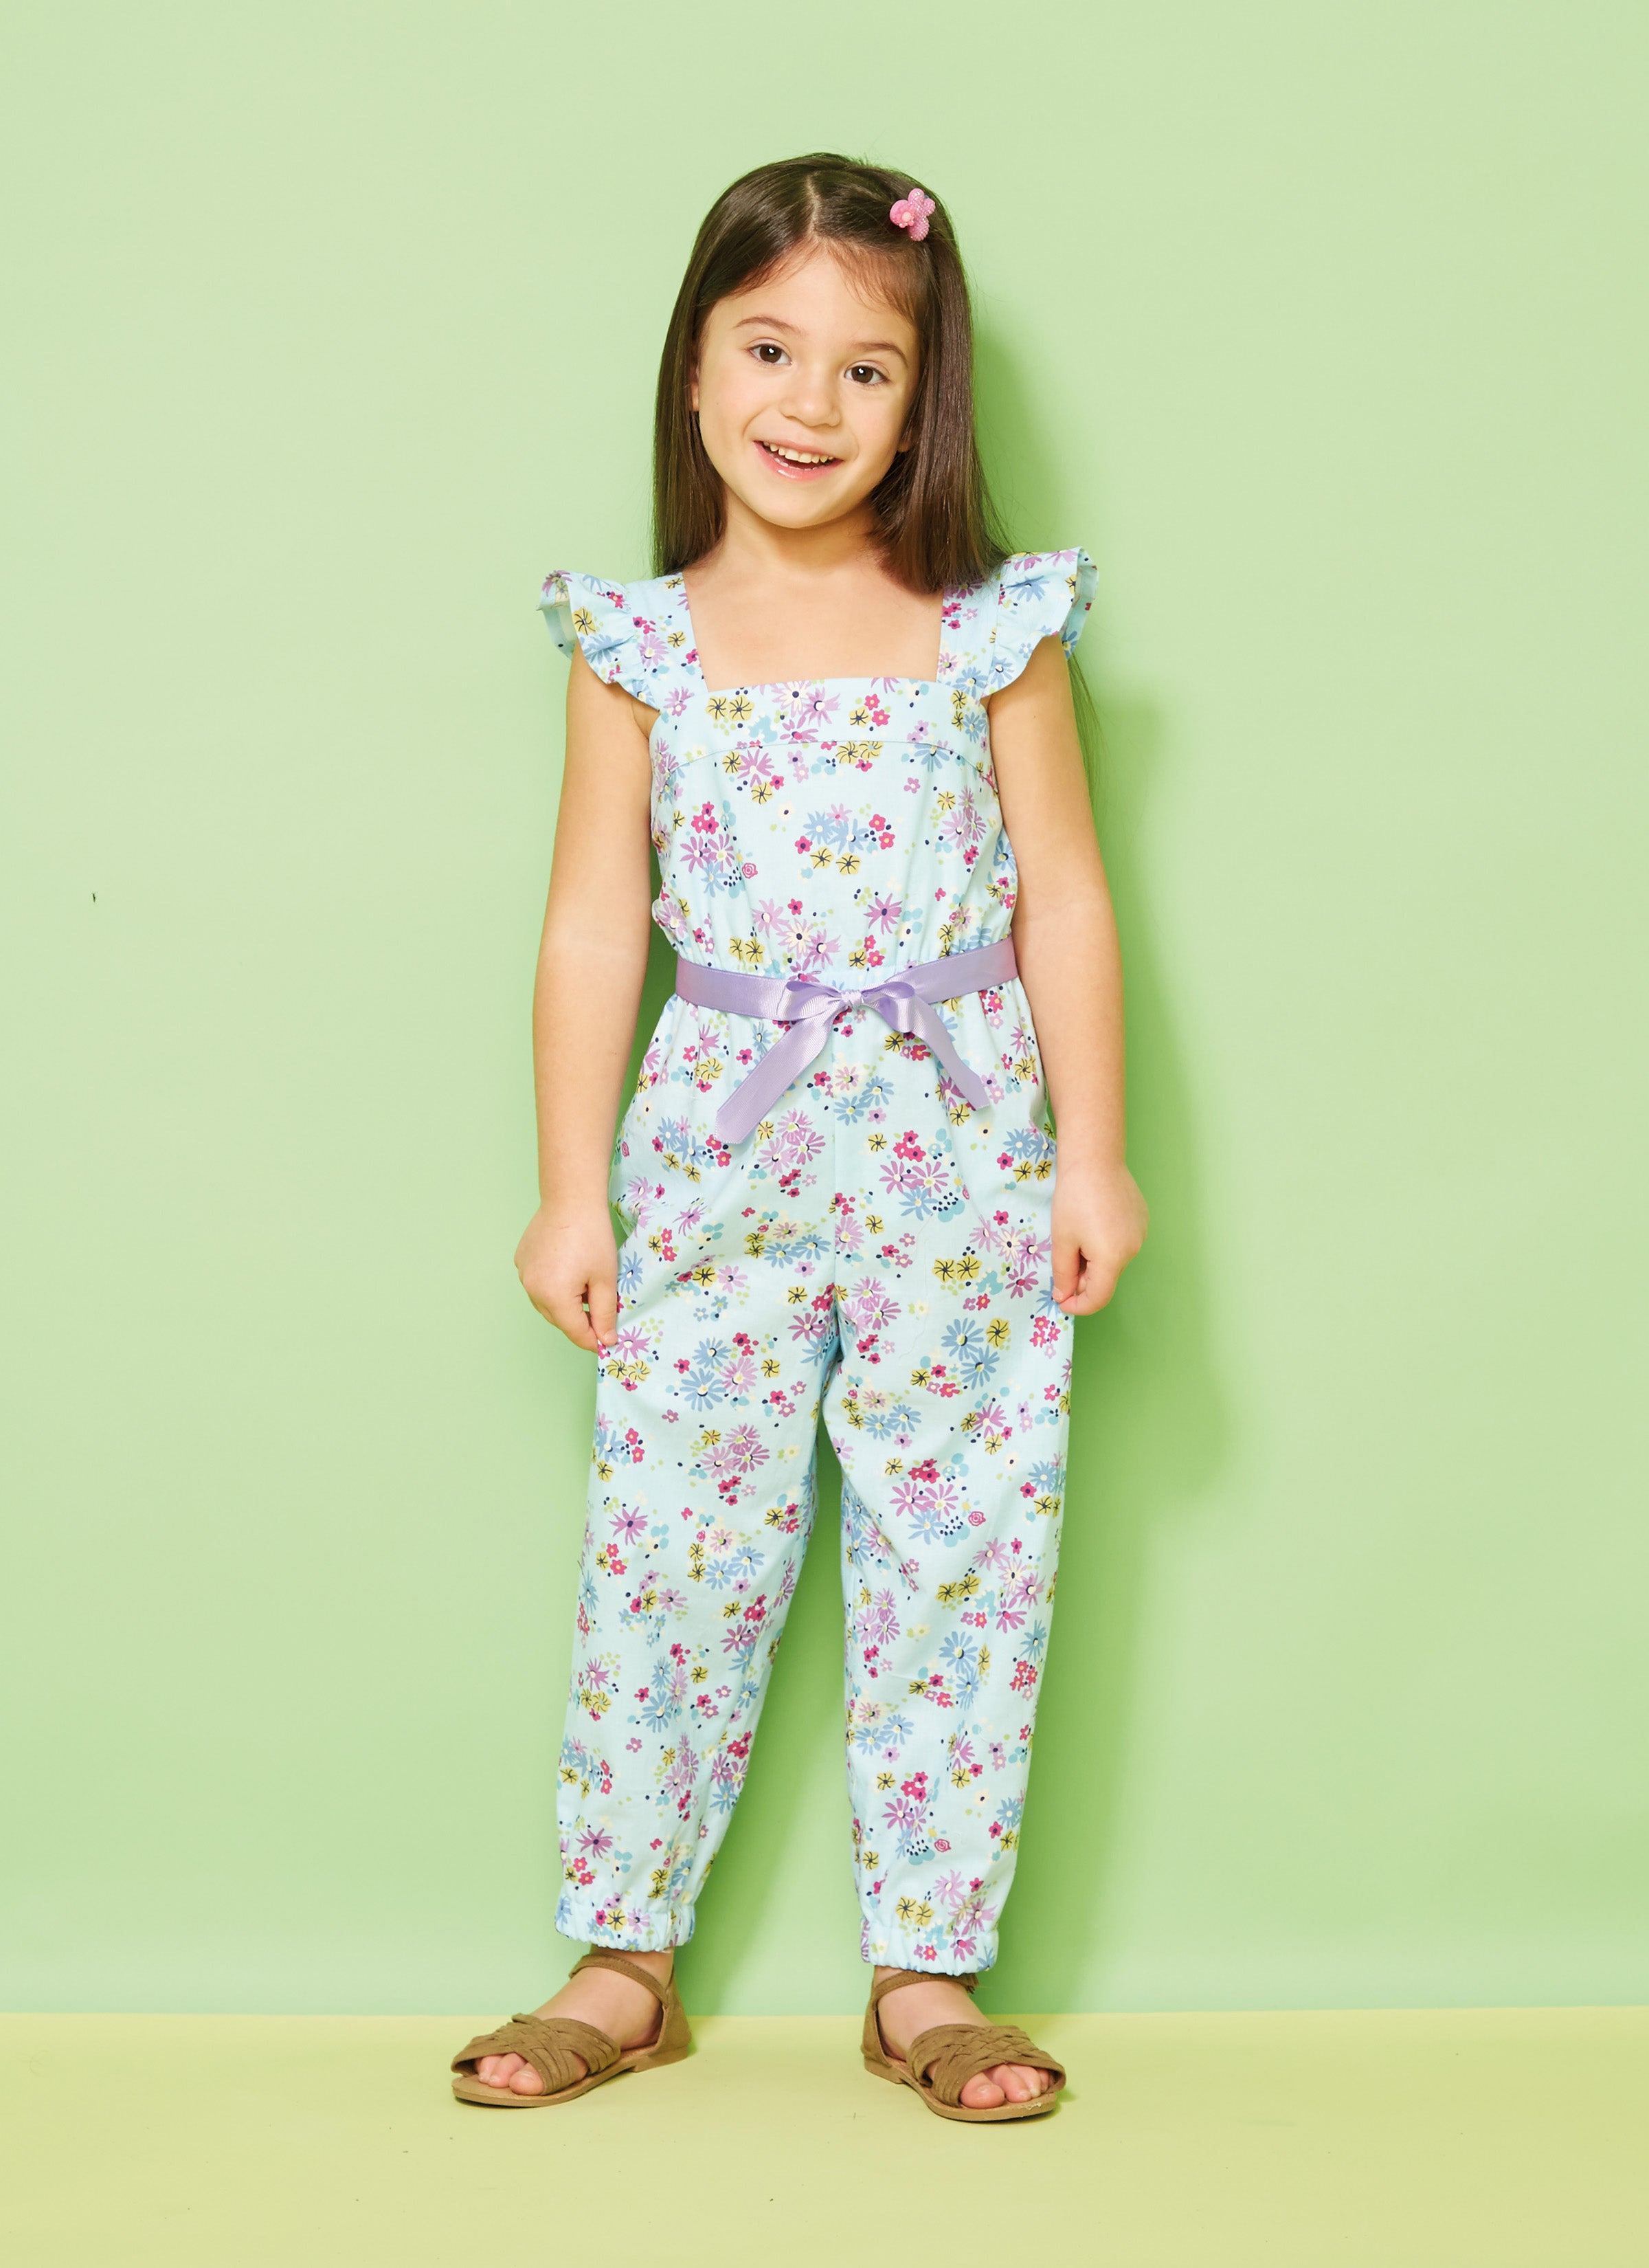 Butterick sewing pattern 6907 Children's Romper, Jumpsuit and Sash from Jaycotts Sewing Supplies